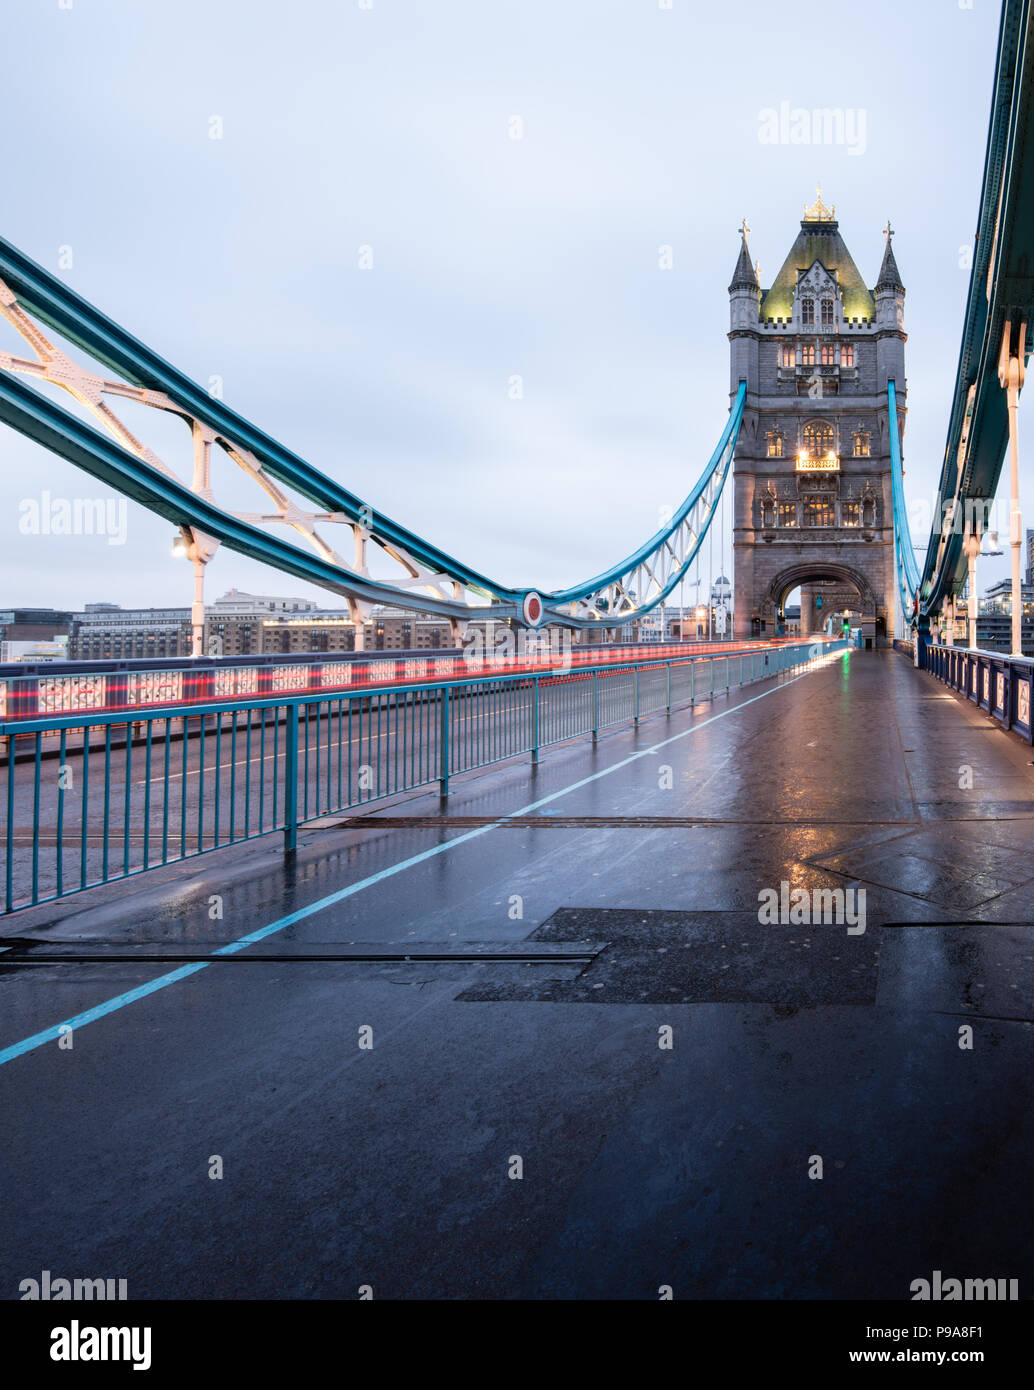 Early morning portrait view of Tower Bridge, London, on a dreary, wet day and with light trails from the passing traffic Stock Photo